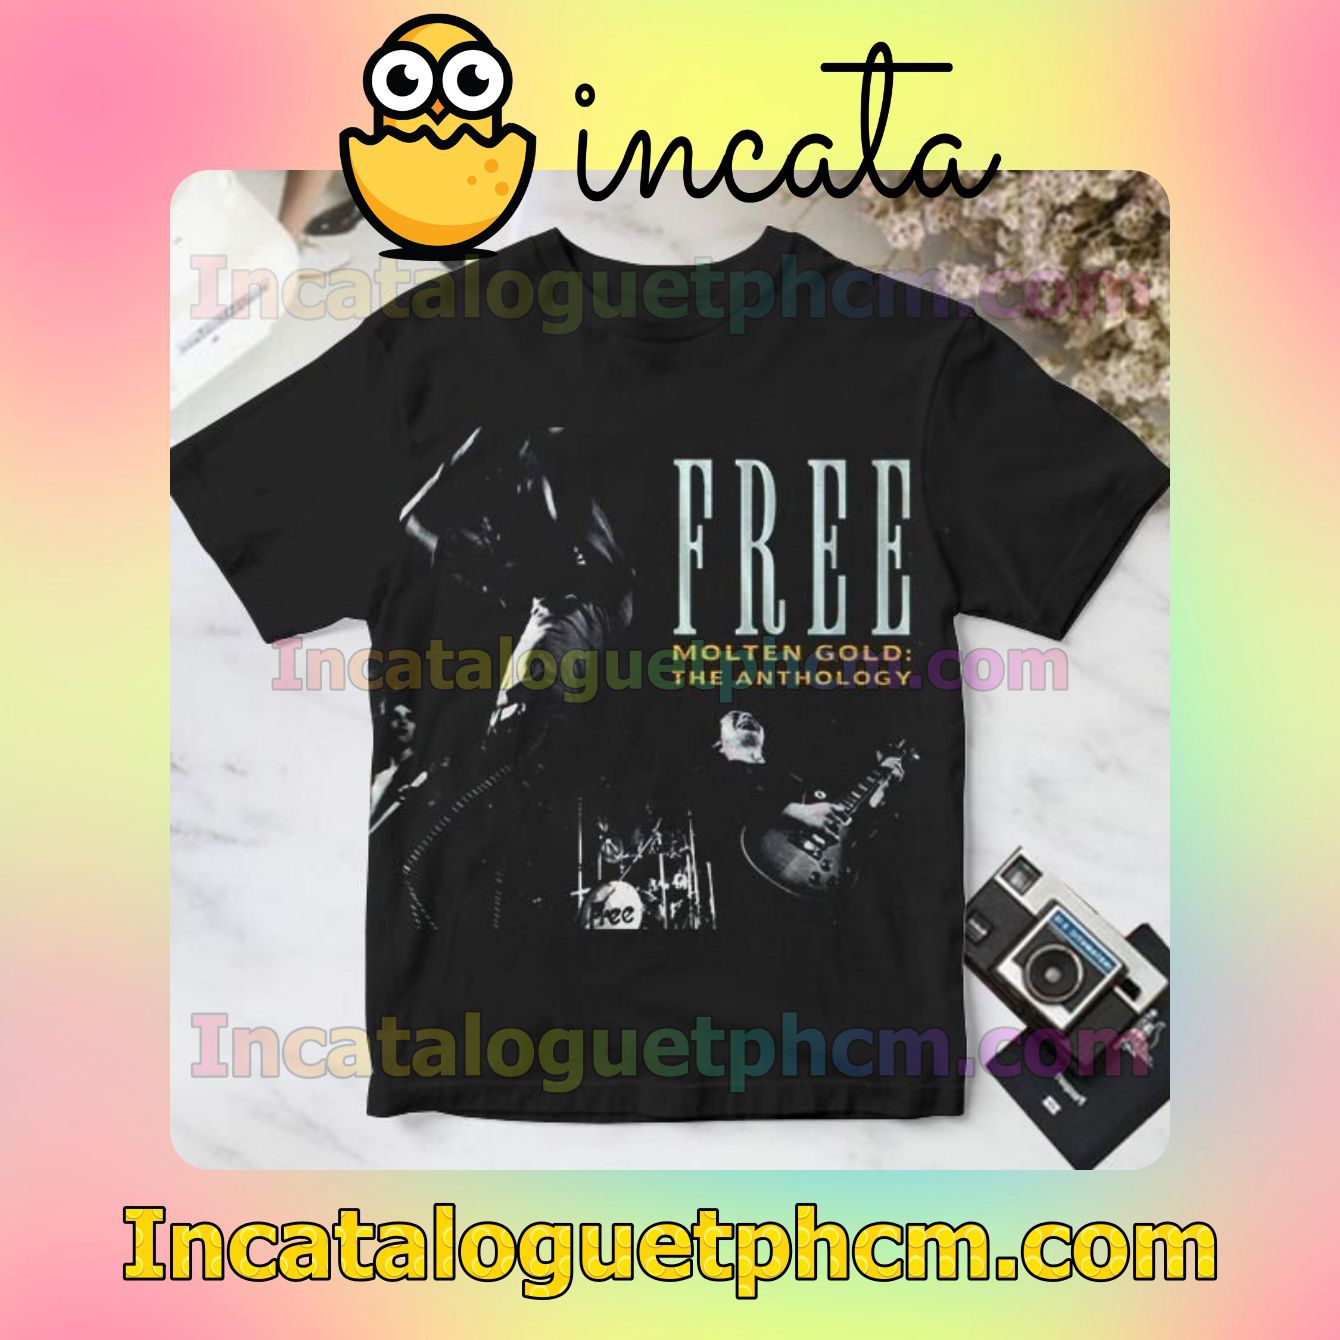 Free Molten Gold The Anthology Album Cover Personalized Shirt